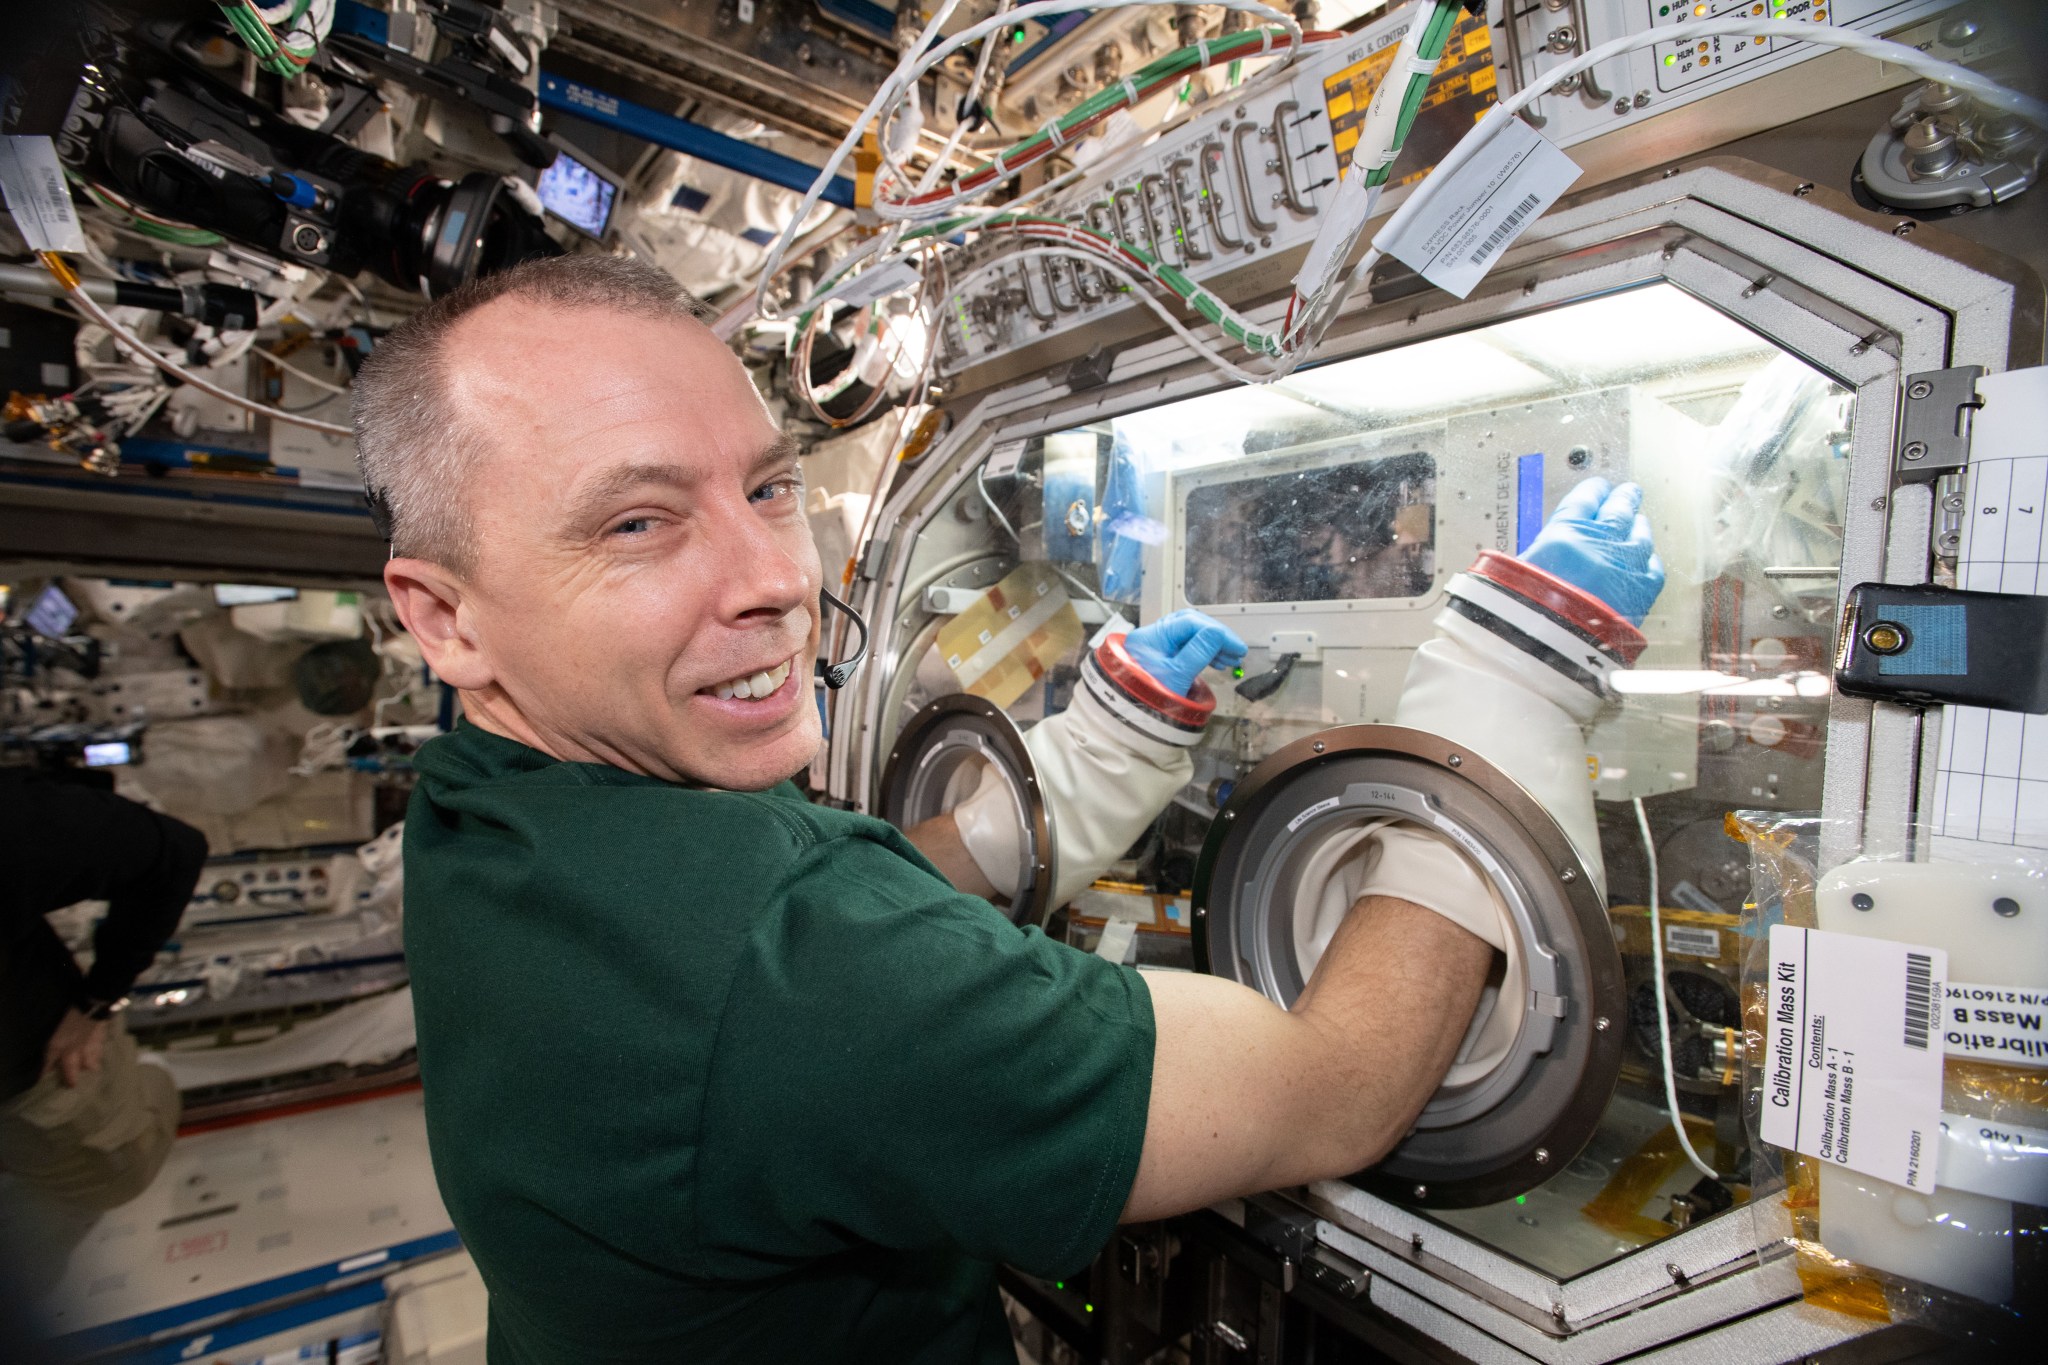 NASA astronaut Andrew Feustel works inside the Microgravity Science Glovebox aboard the International Space Station.